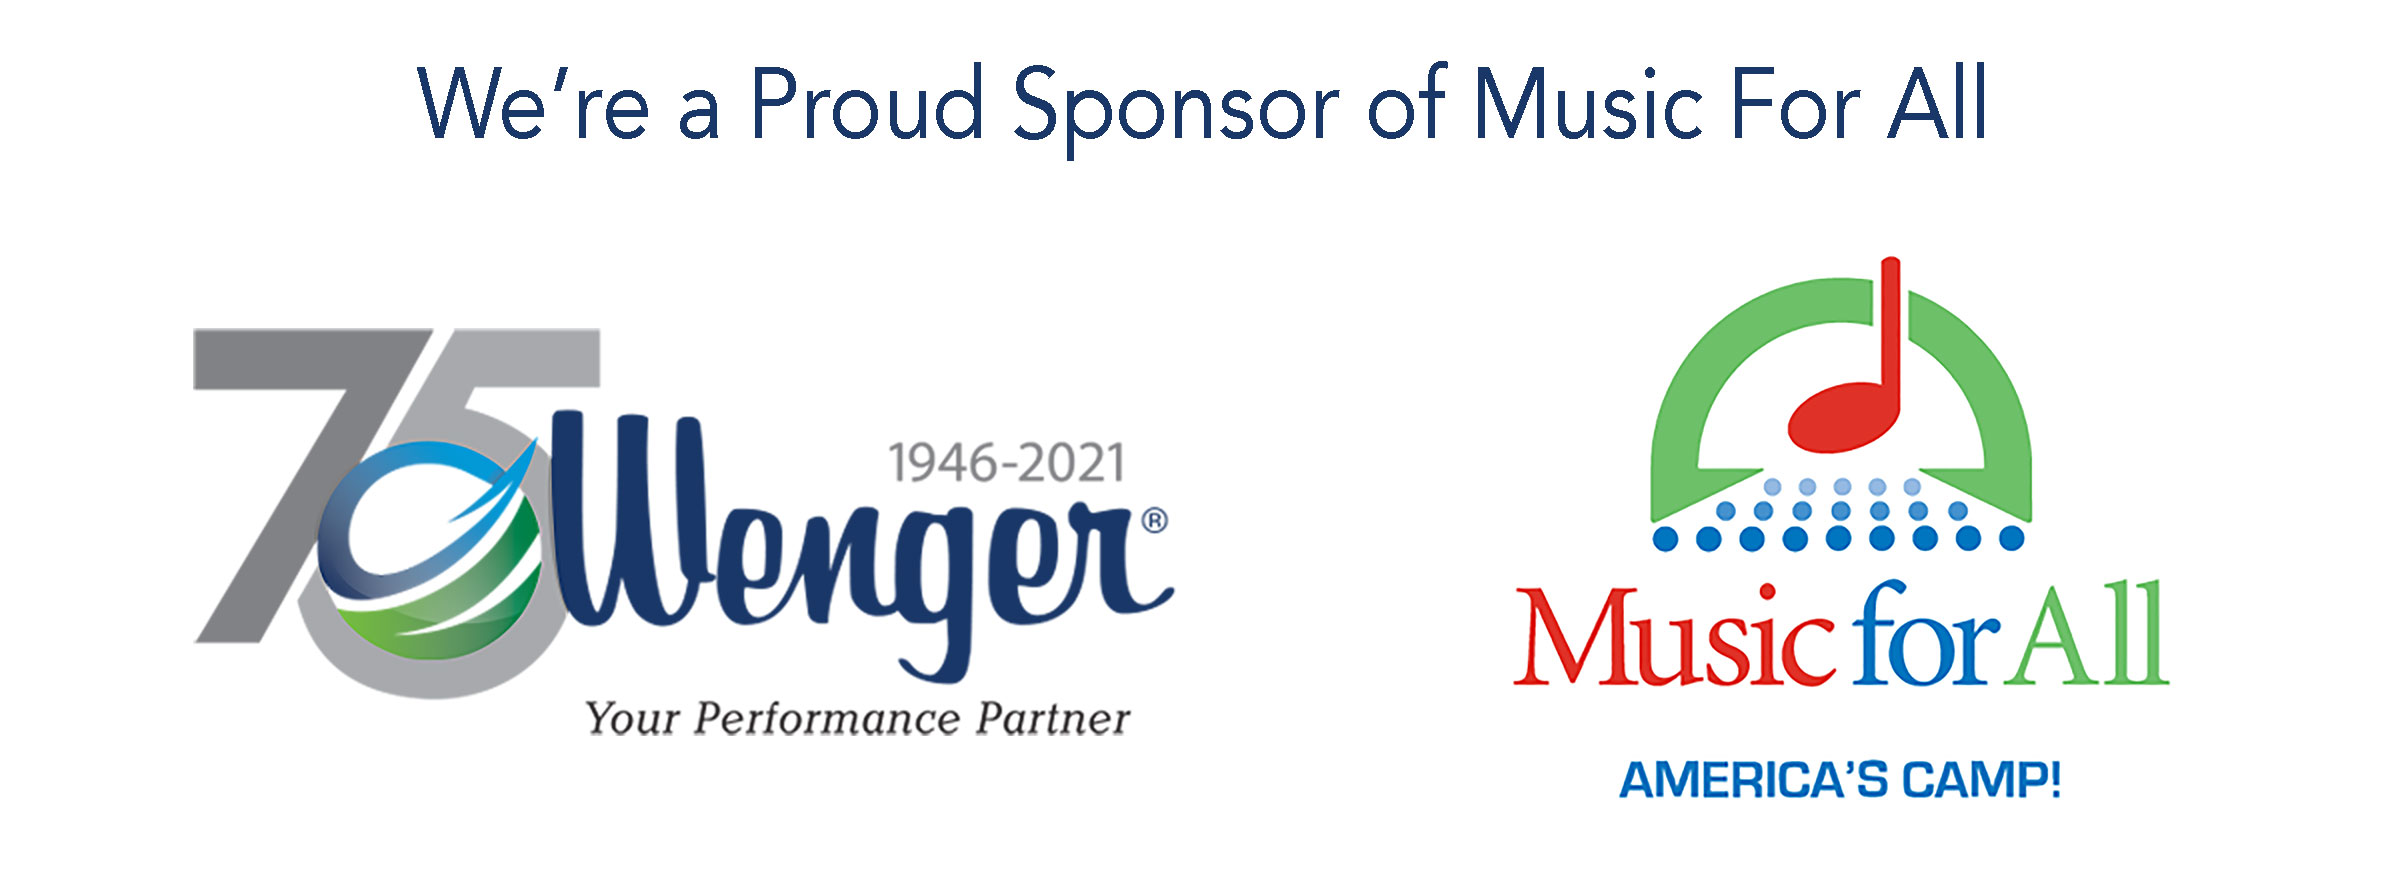 We're a proud sponsor of Music for All